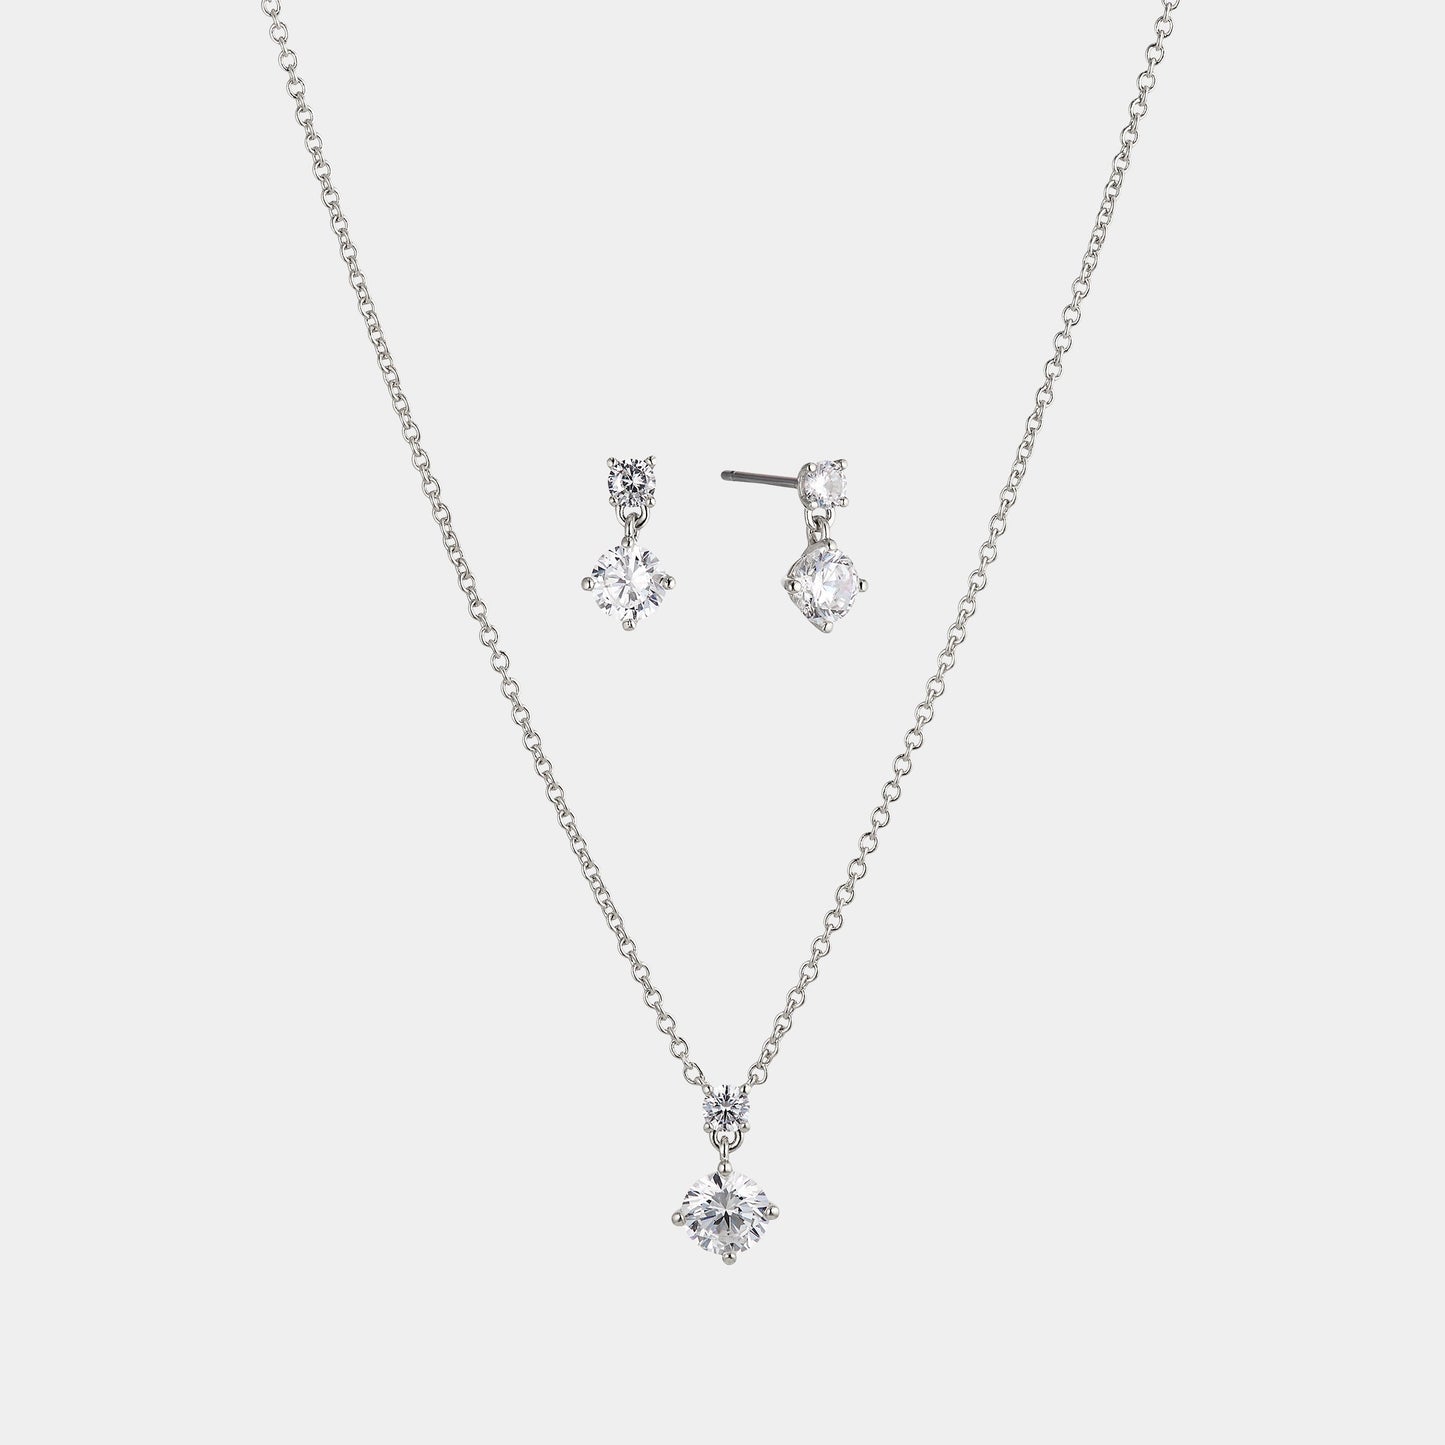 BRIDESMAIDS SOLITAIRE PENDANT AND EARRING SET